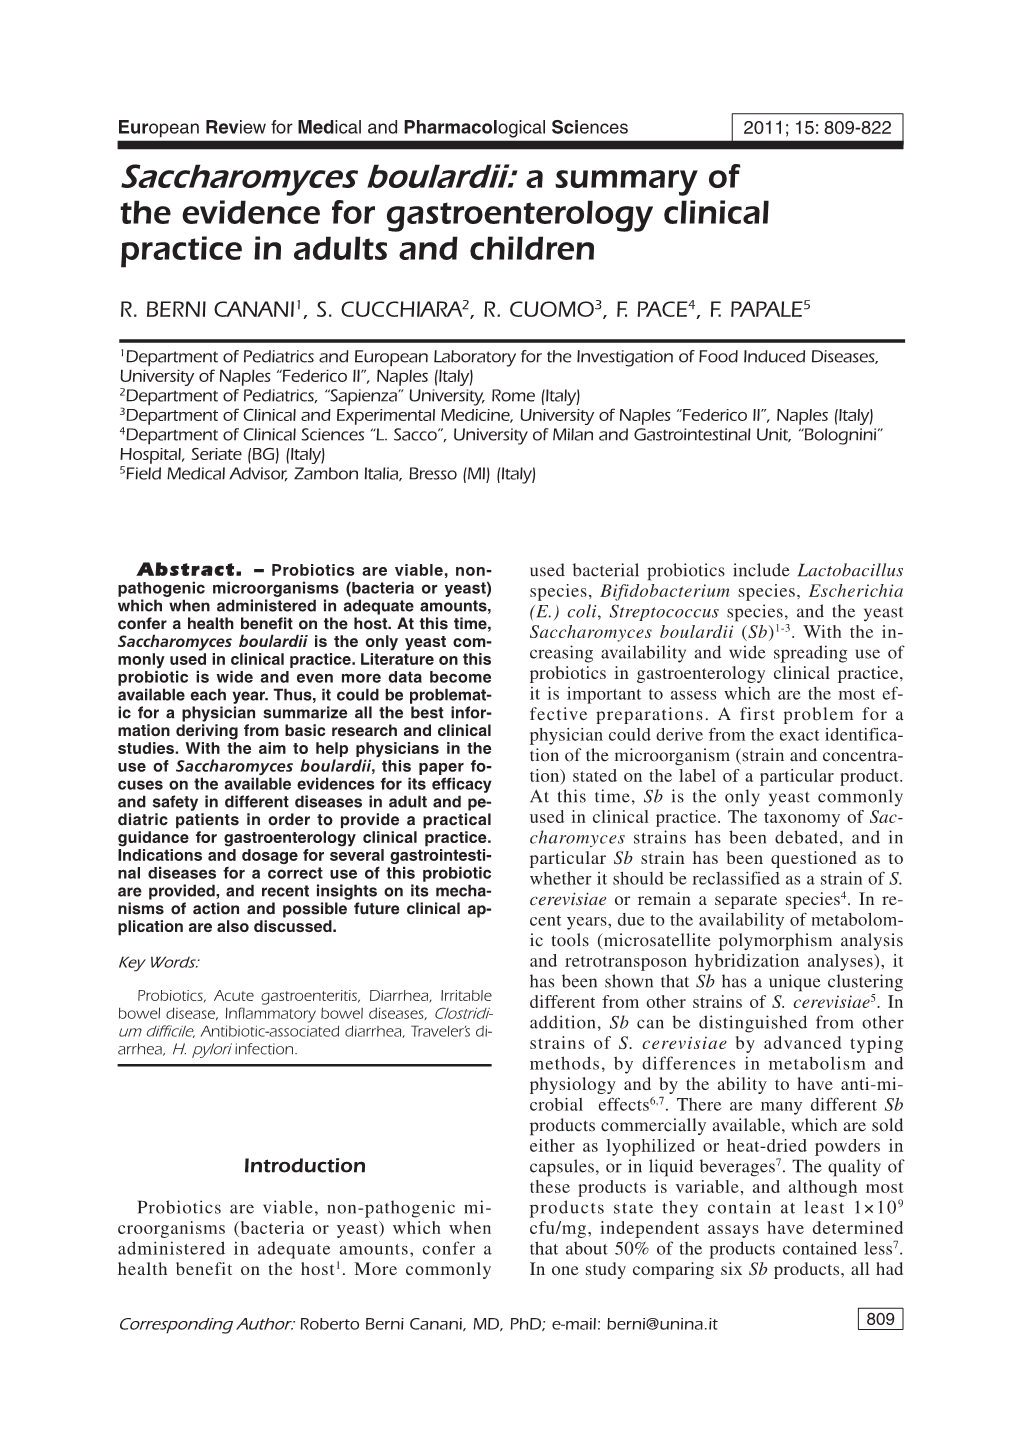 Saccharomyces Boulardii: a Summary of the Evidence for Gastroenterology Clinical Practice in Adults and Children